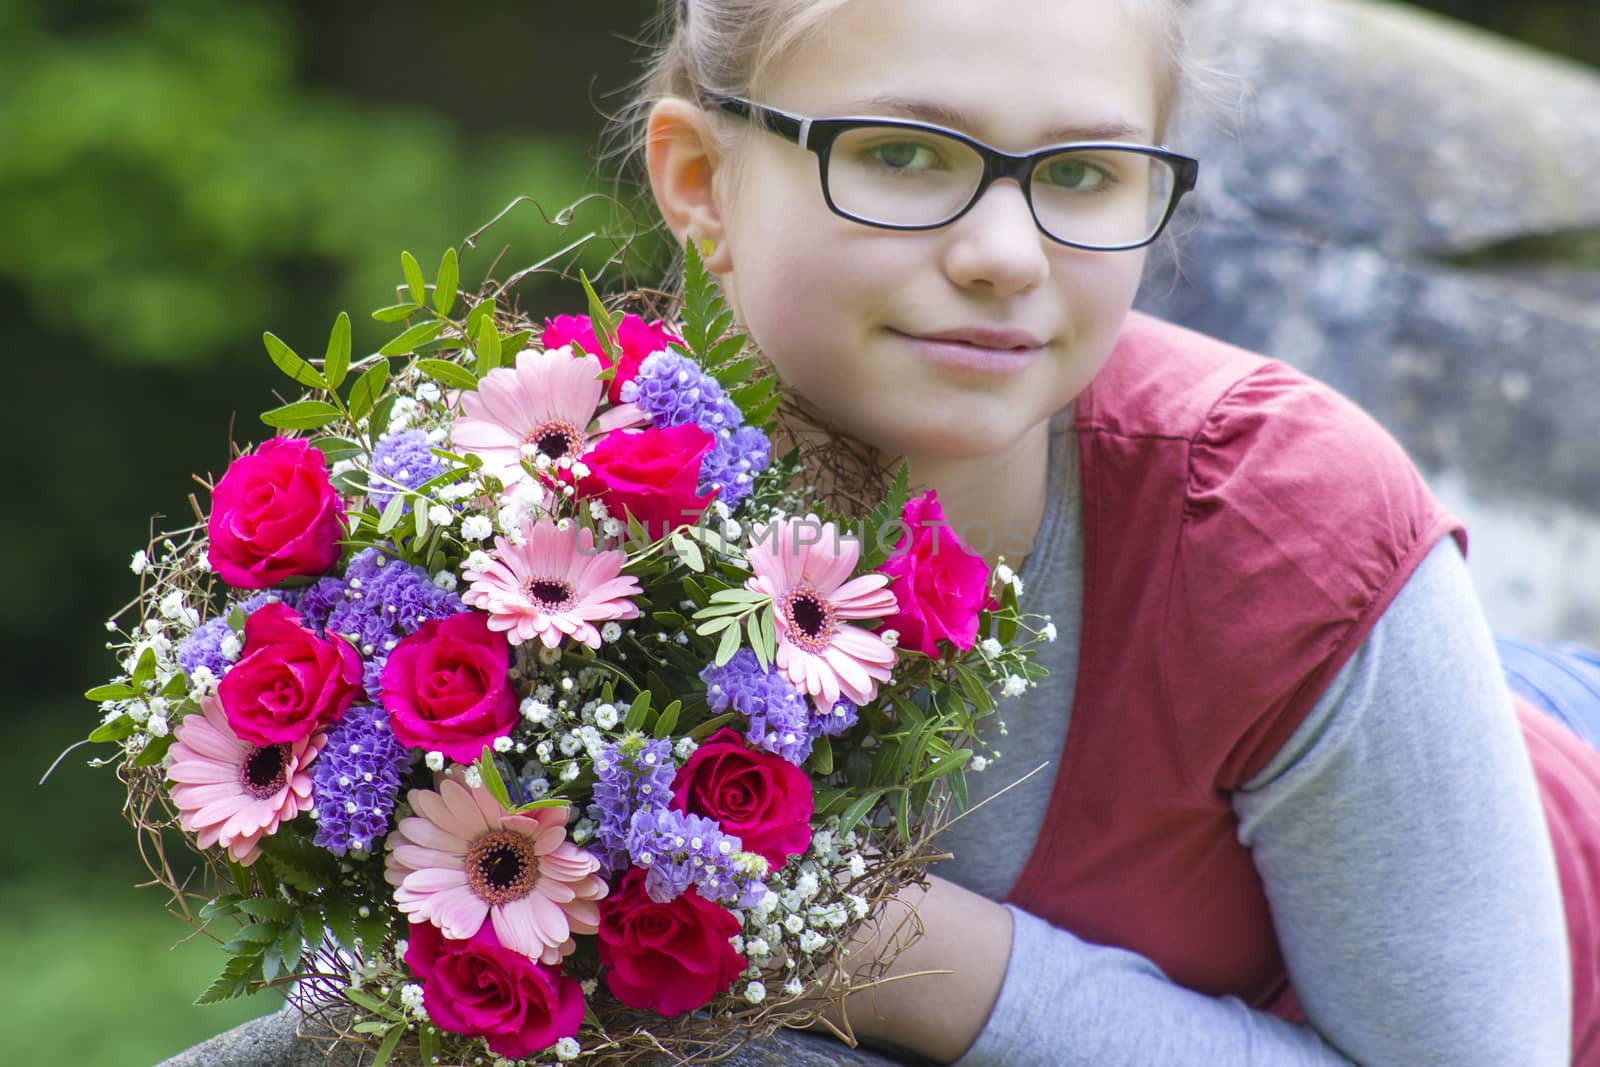 portrait of a beautiful young girl with flowers  by miradrozdowski